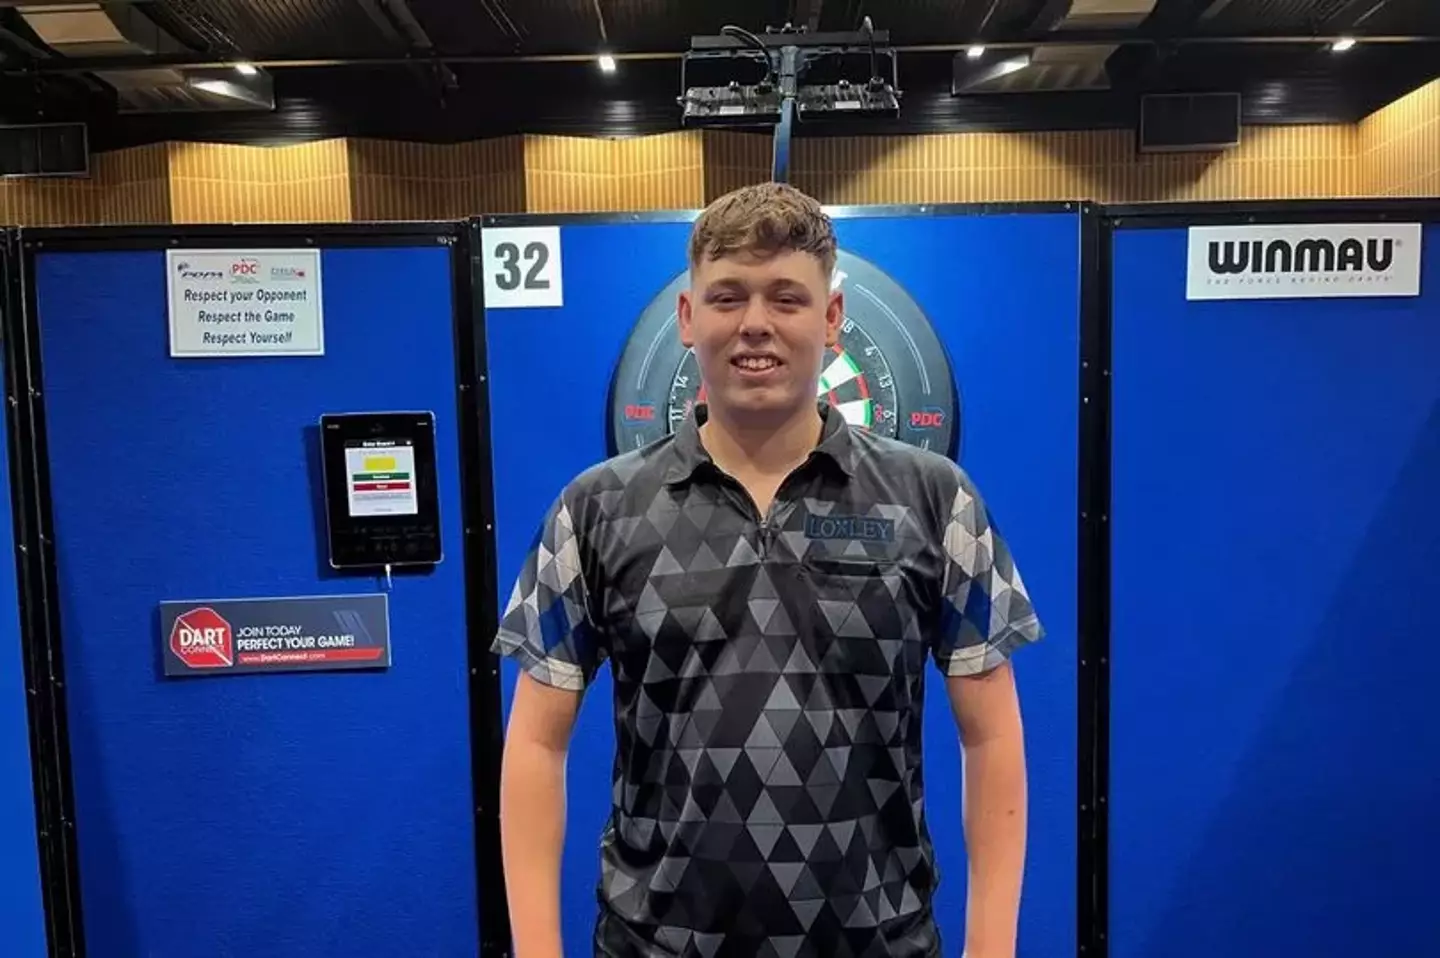 20-year-old Owen Bates is set for the PDC World Darts Championship at the Ally Pally.